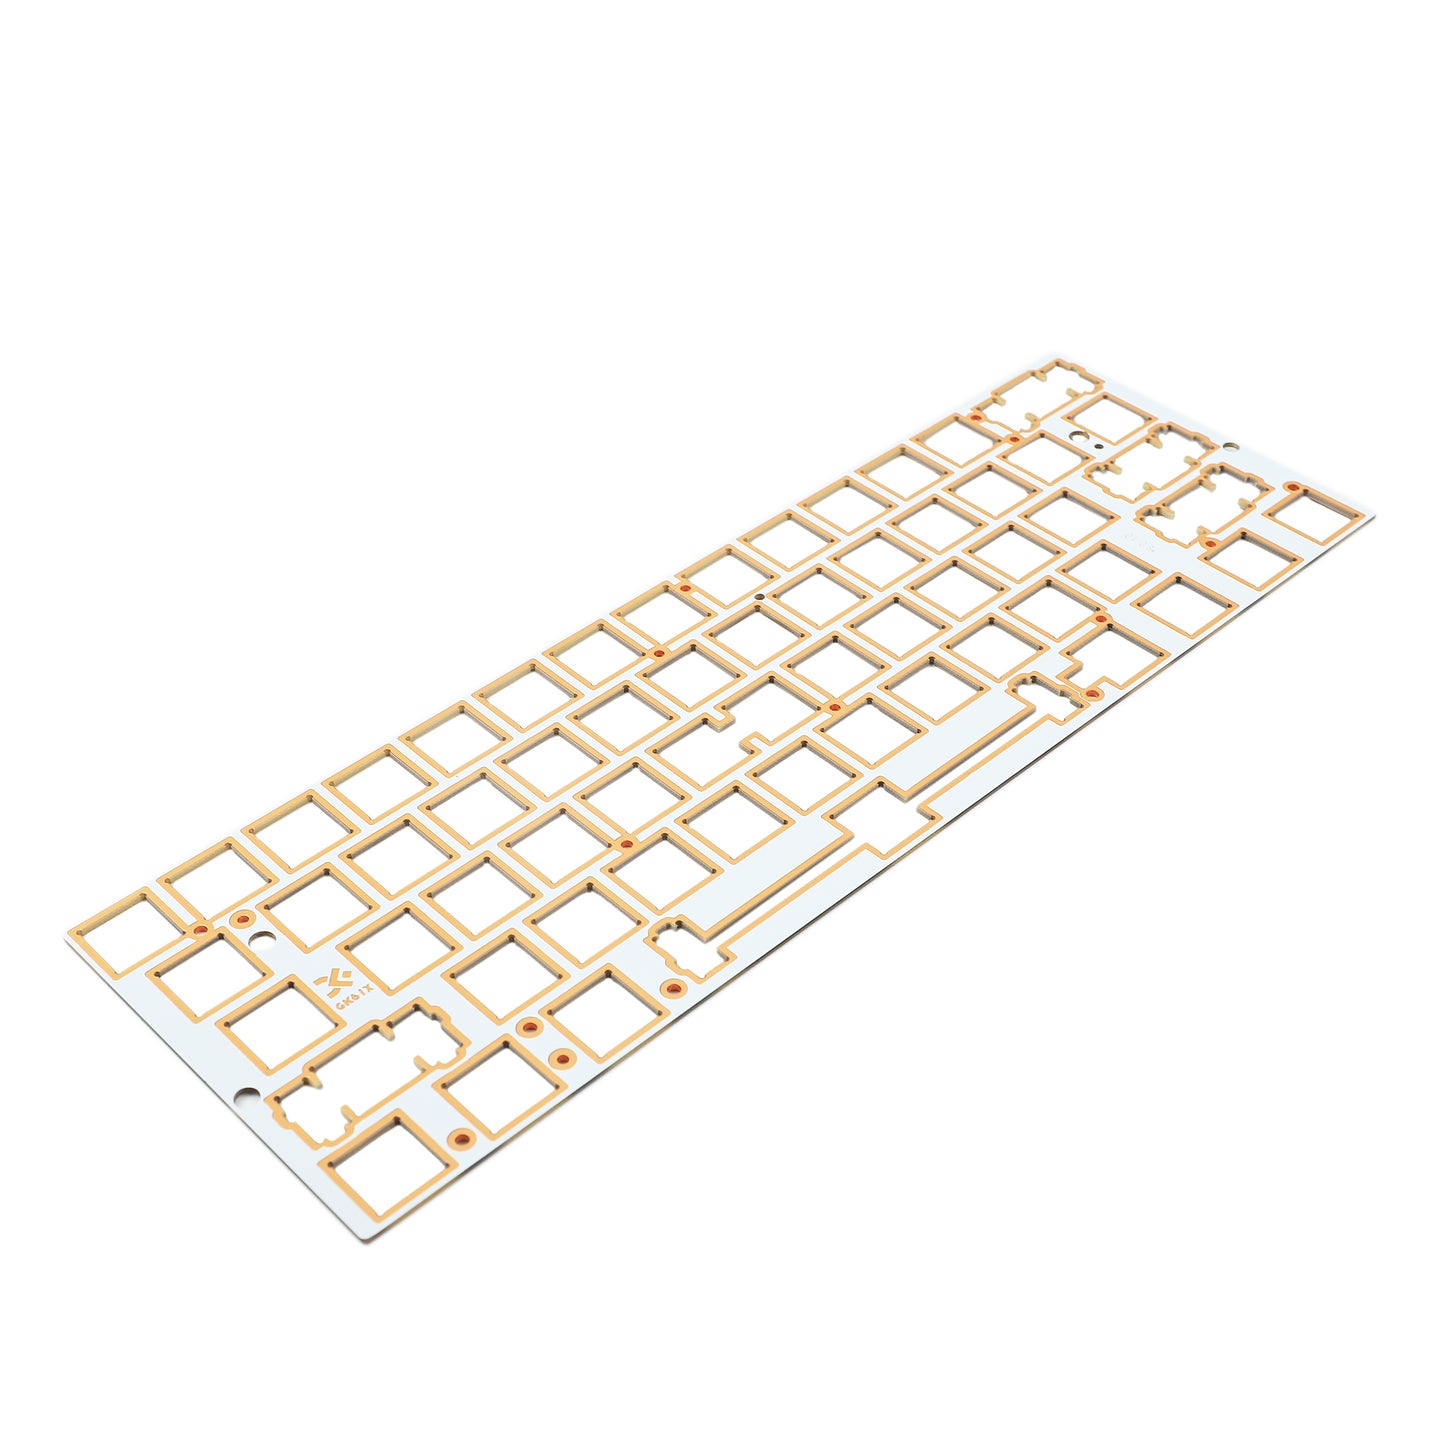 GK61 Aluminum / Steel / Brass Plate And Stabilizers(GH60 PCB GK61 Hot Swap PCB Using/Plate Mounted)